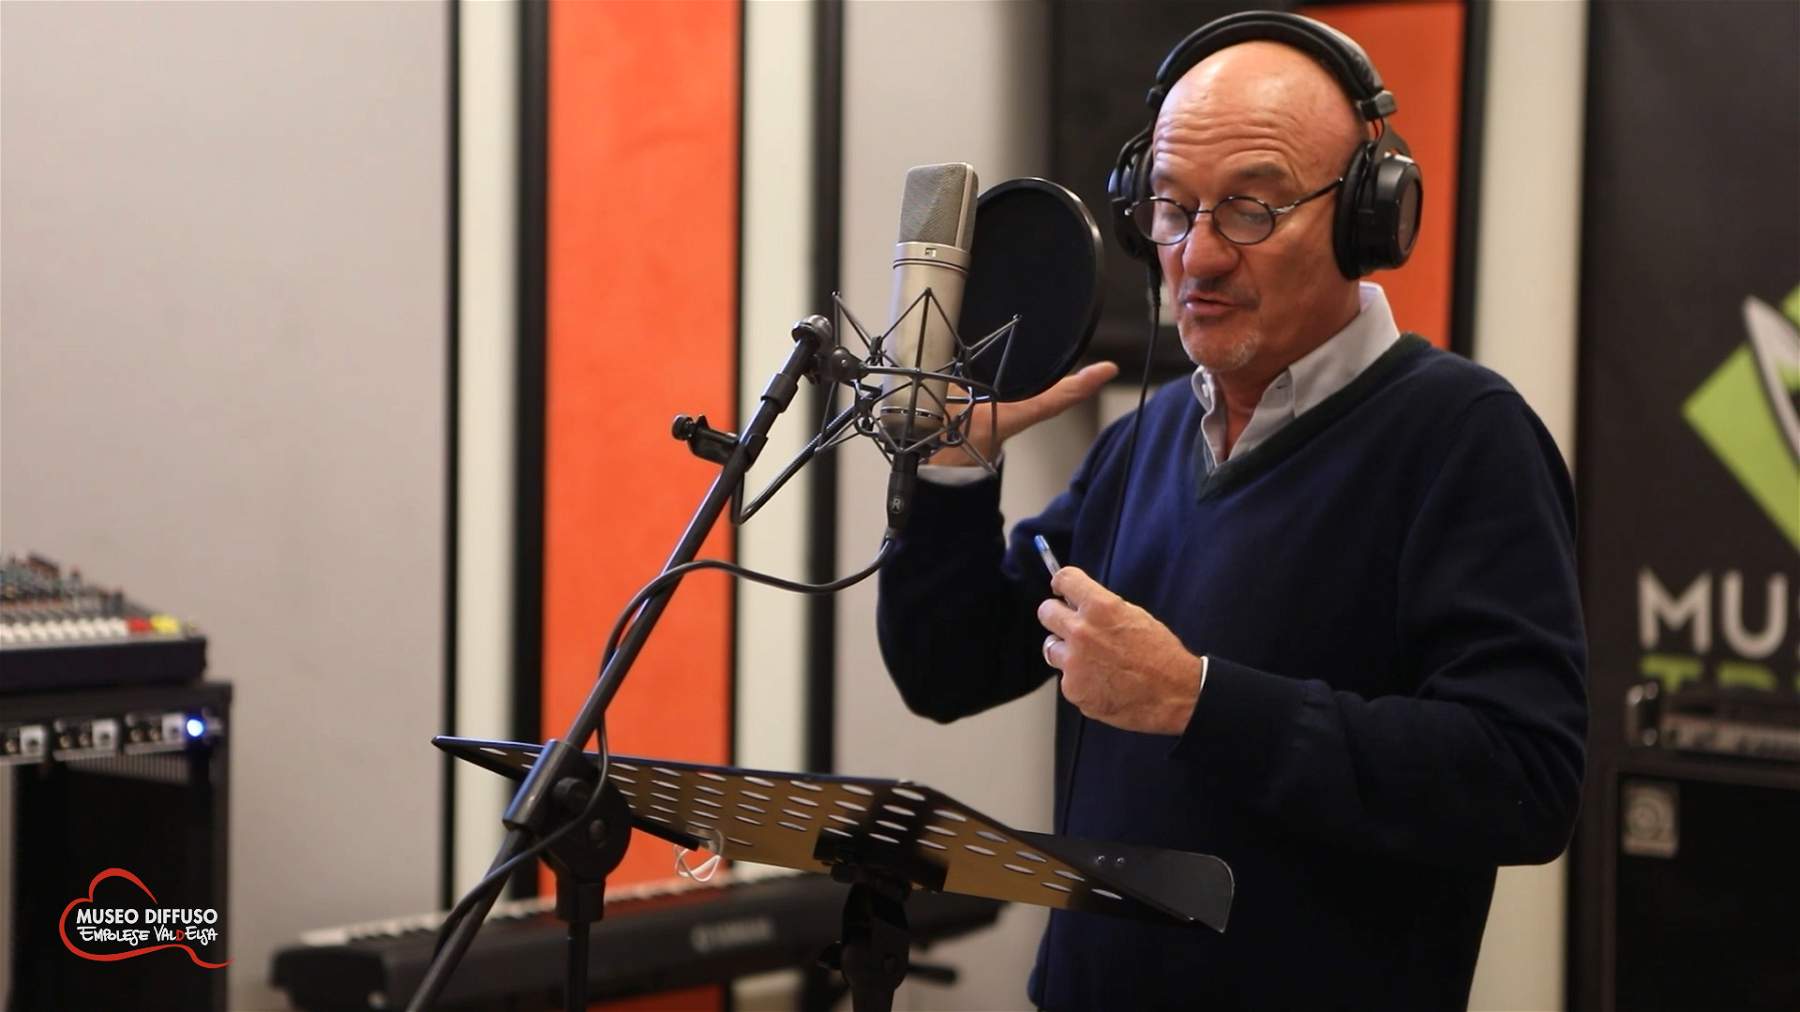 Claudio Bisio gives his voice for free audio guide of Empolese Valdelsa museums